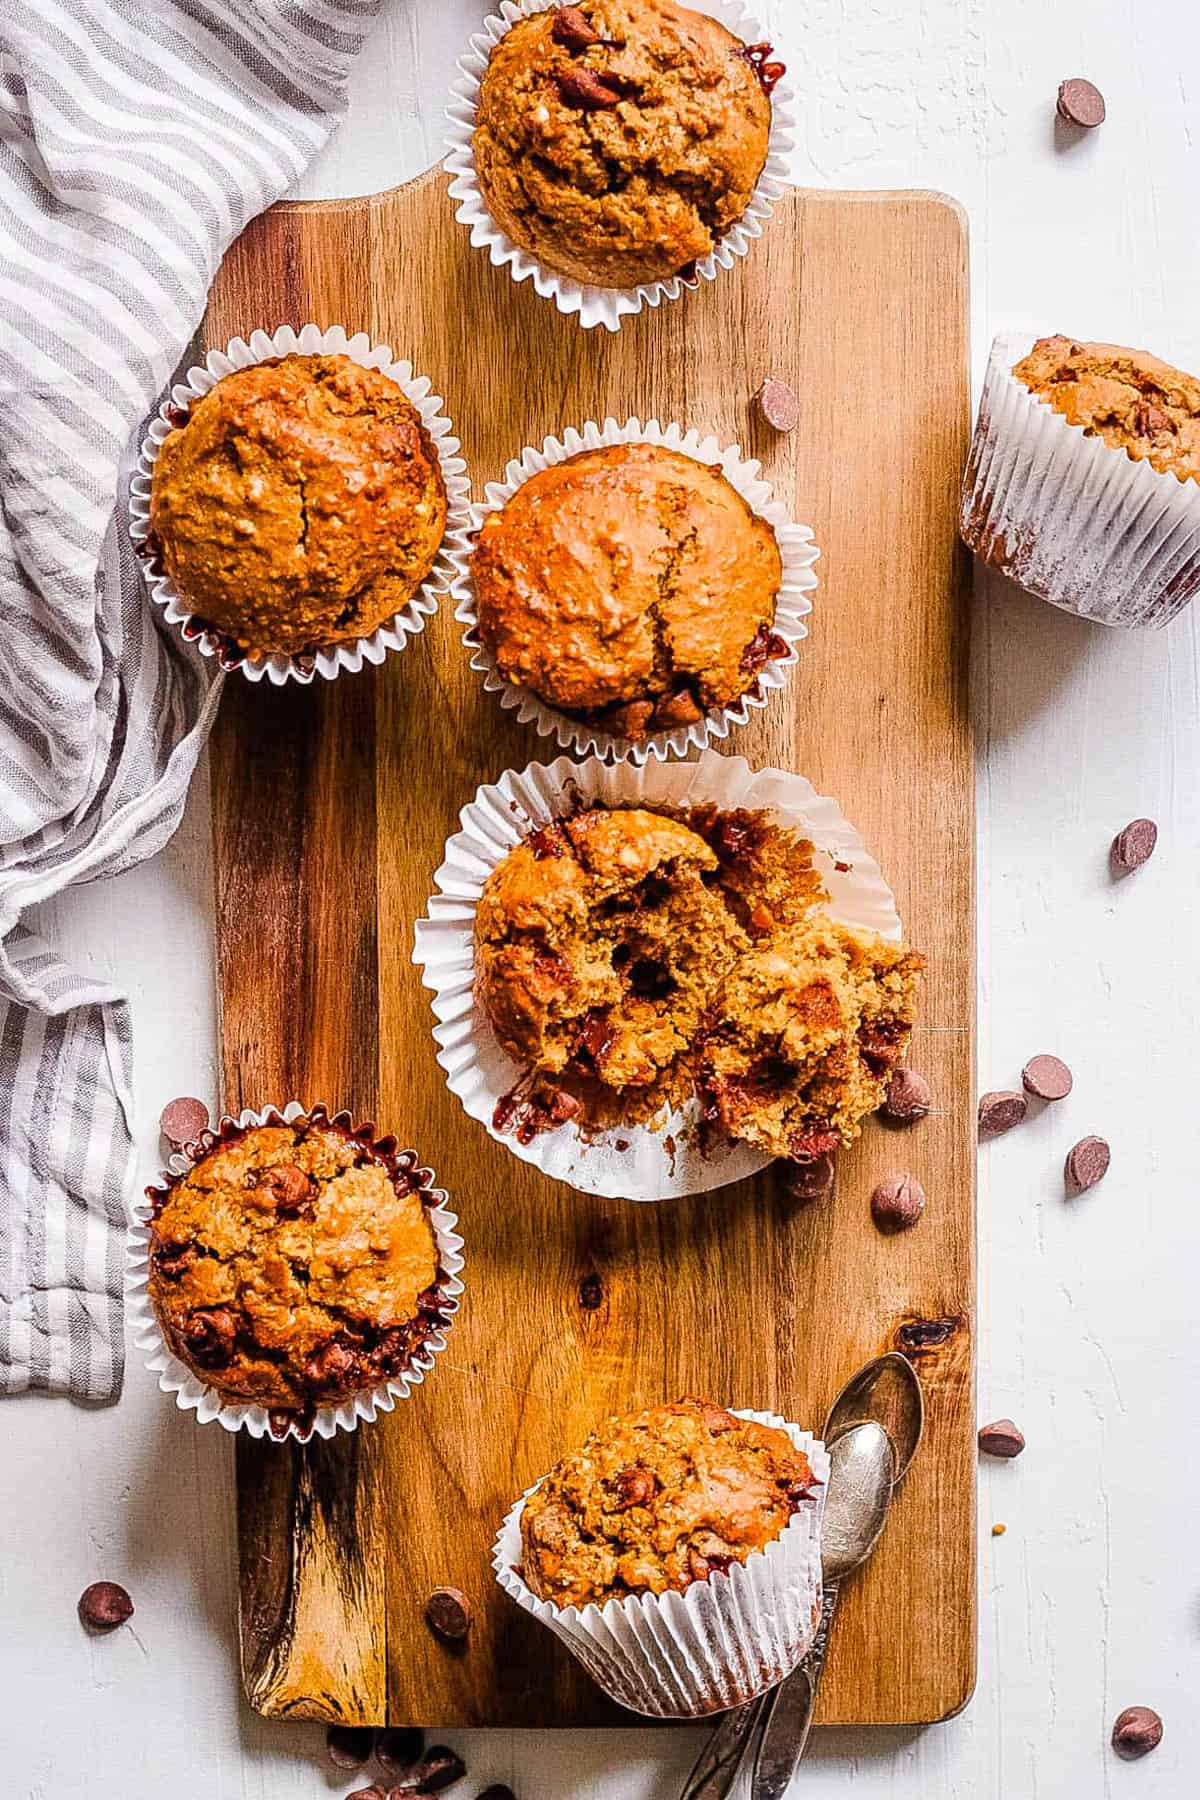 Healthy peanut butter muffins with chocolate chips on a wooden cutting board.